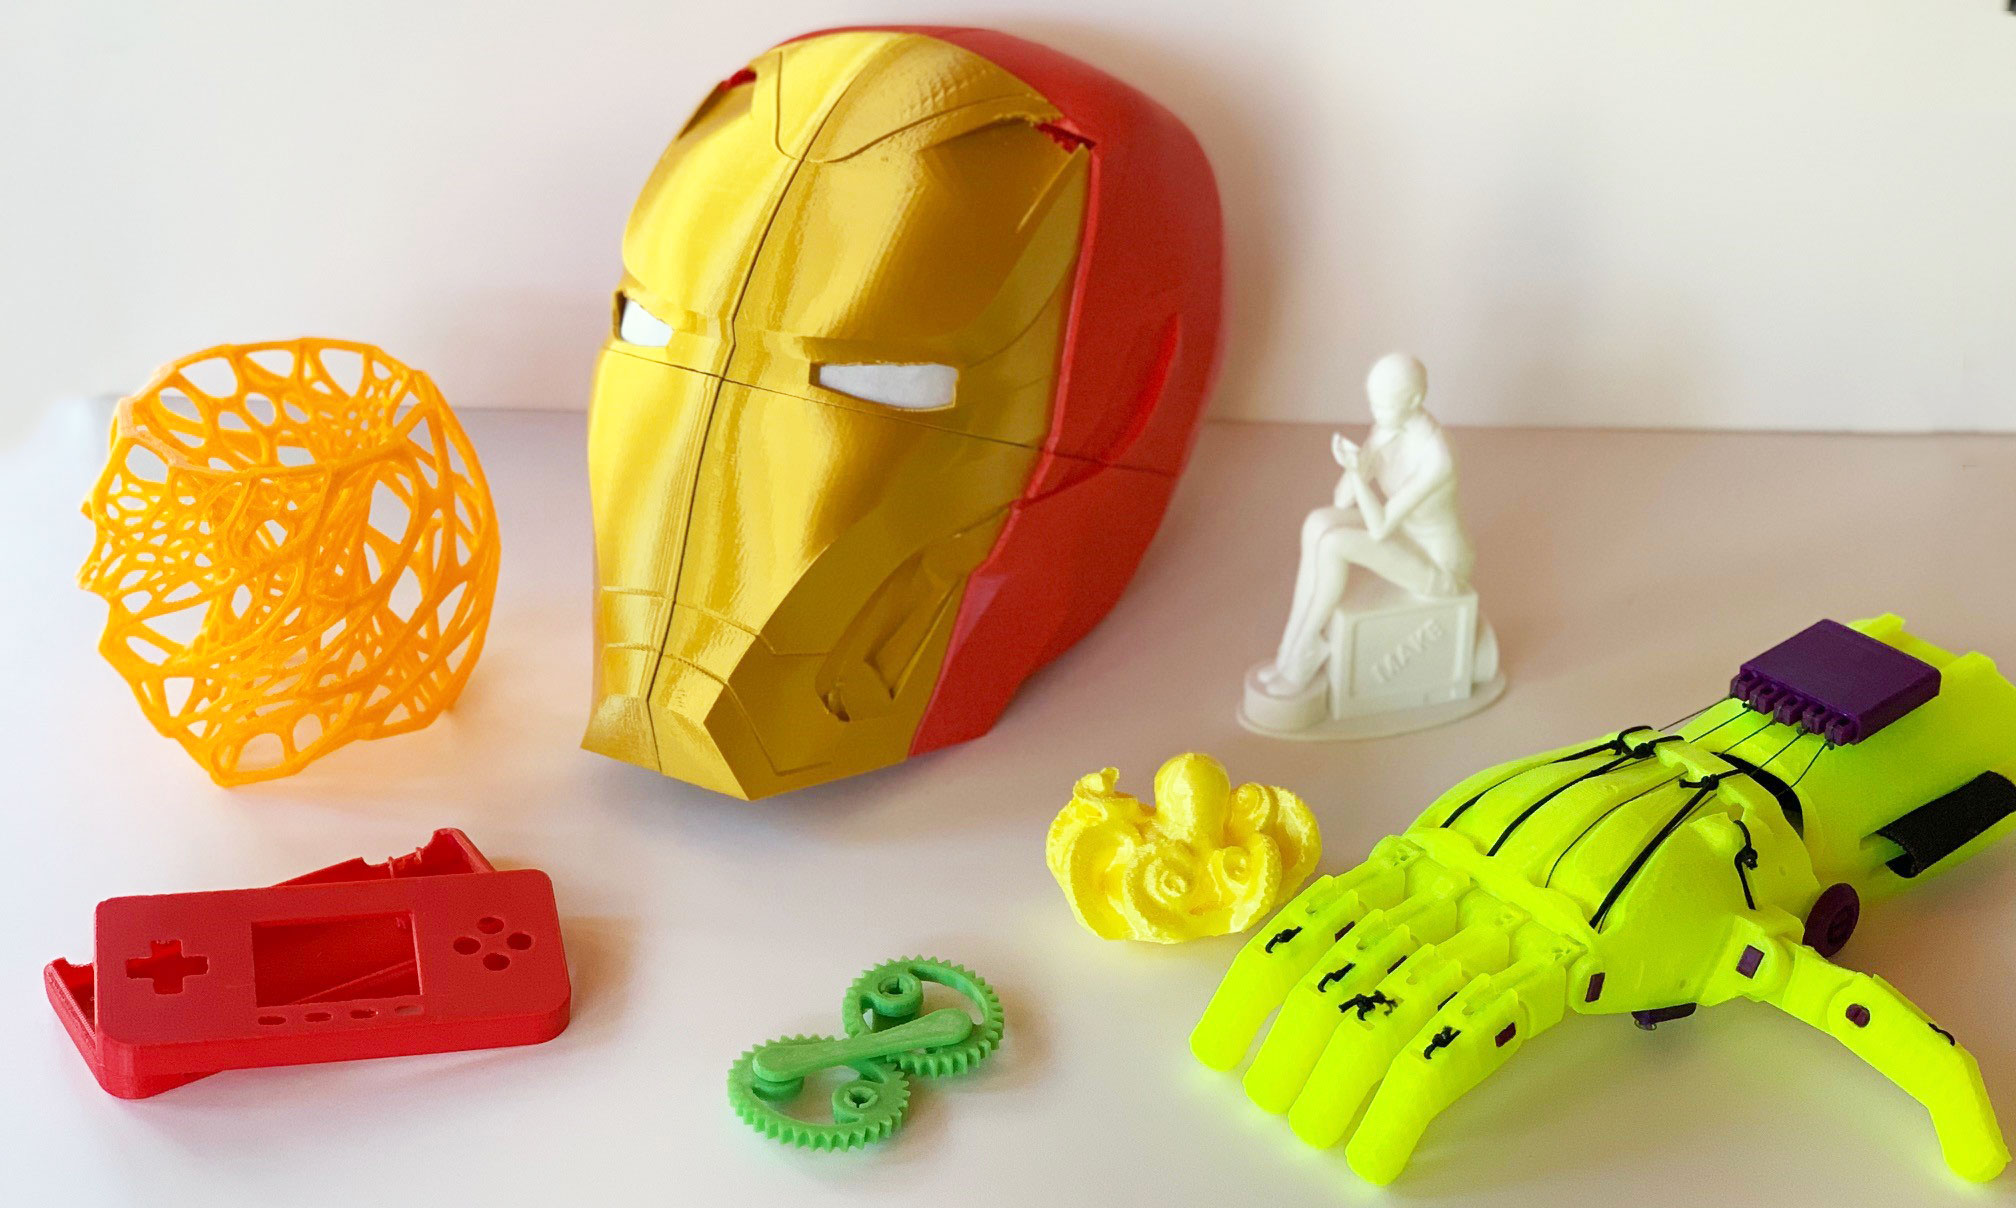 3D prints models including Iron Man helmet, octopus, handheld game cover and various other models. 